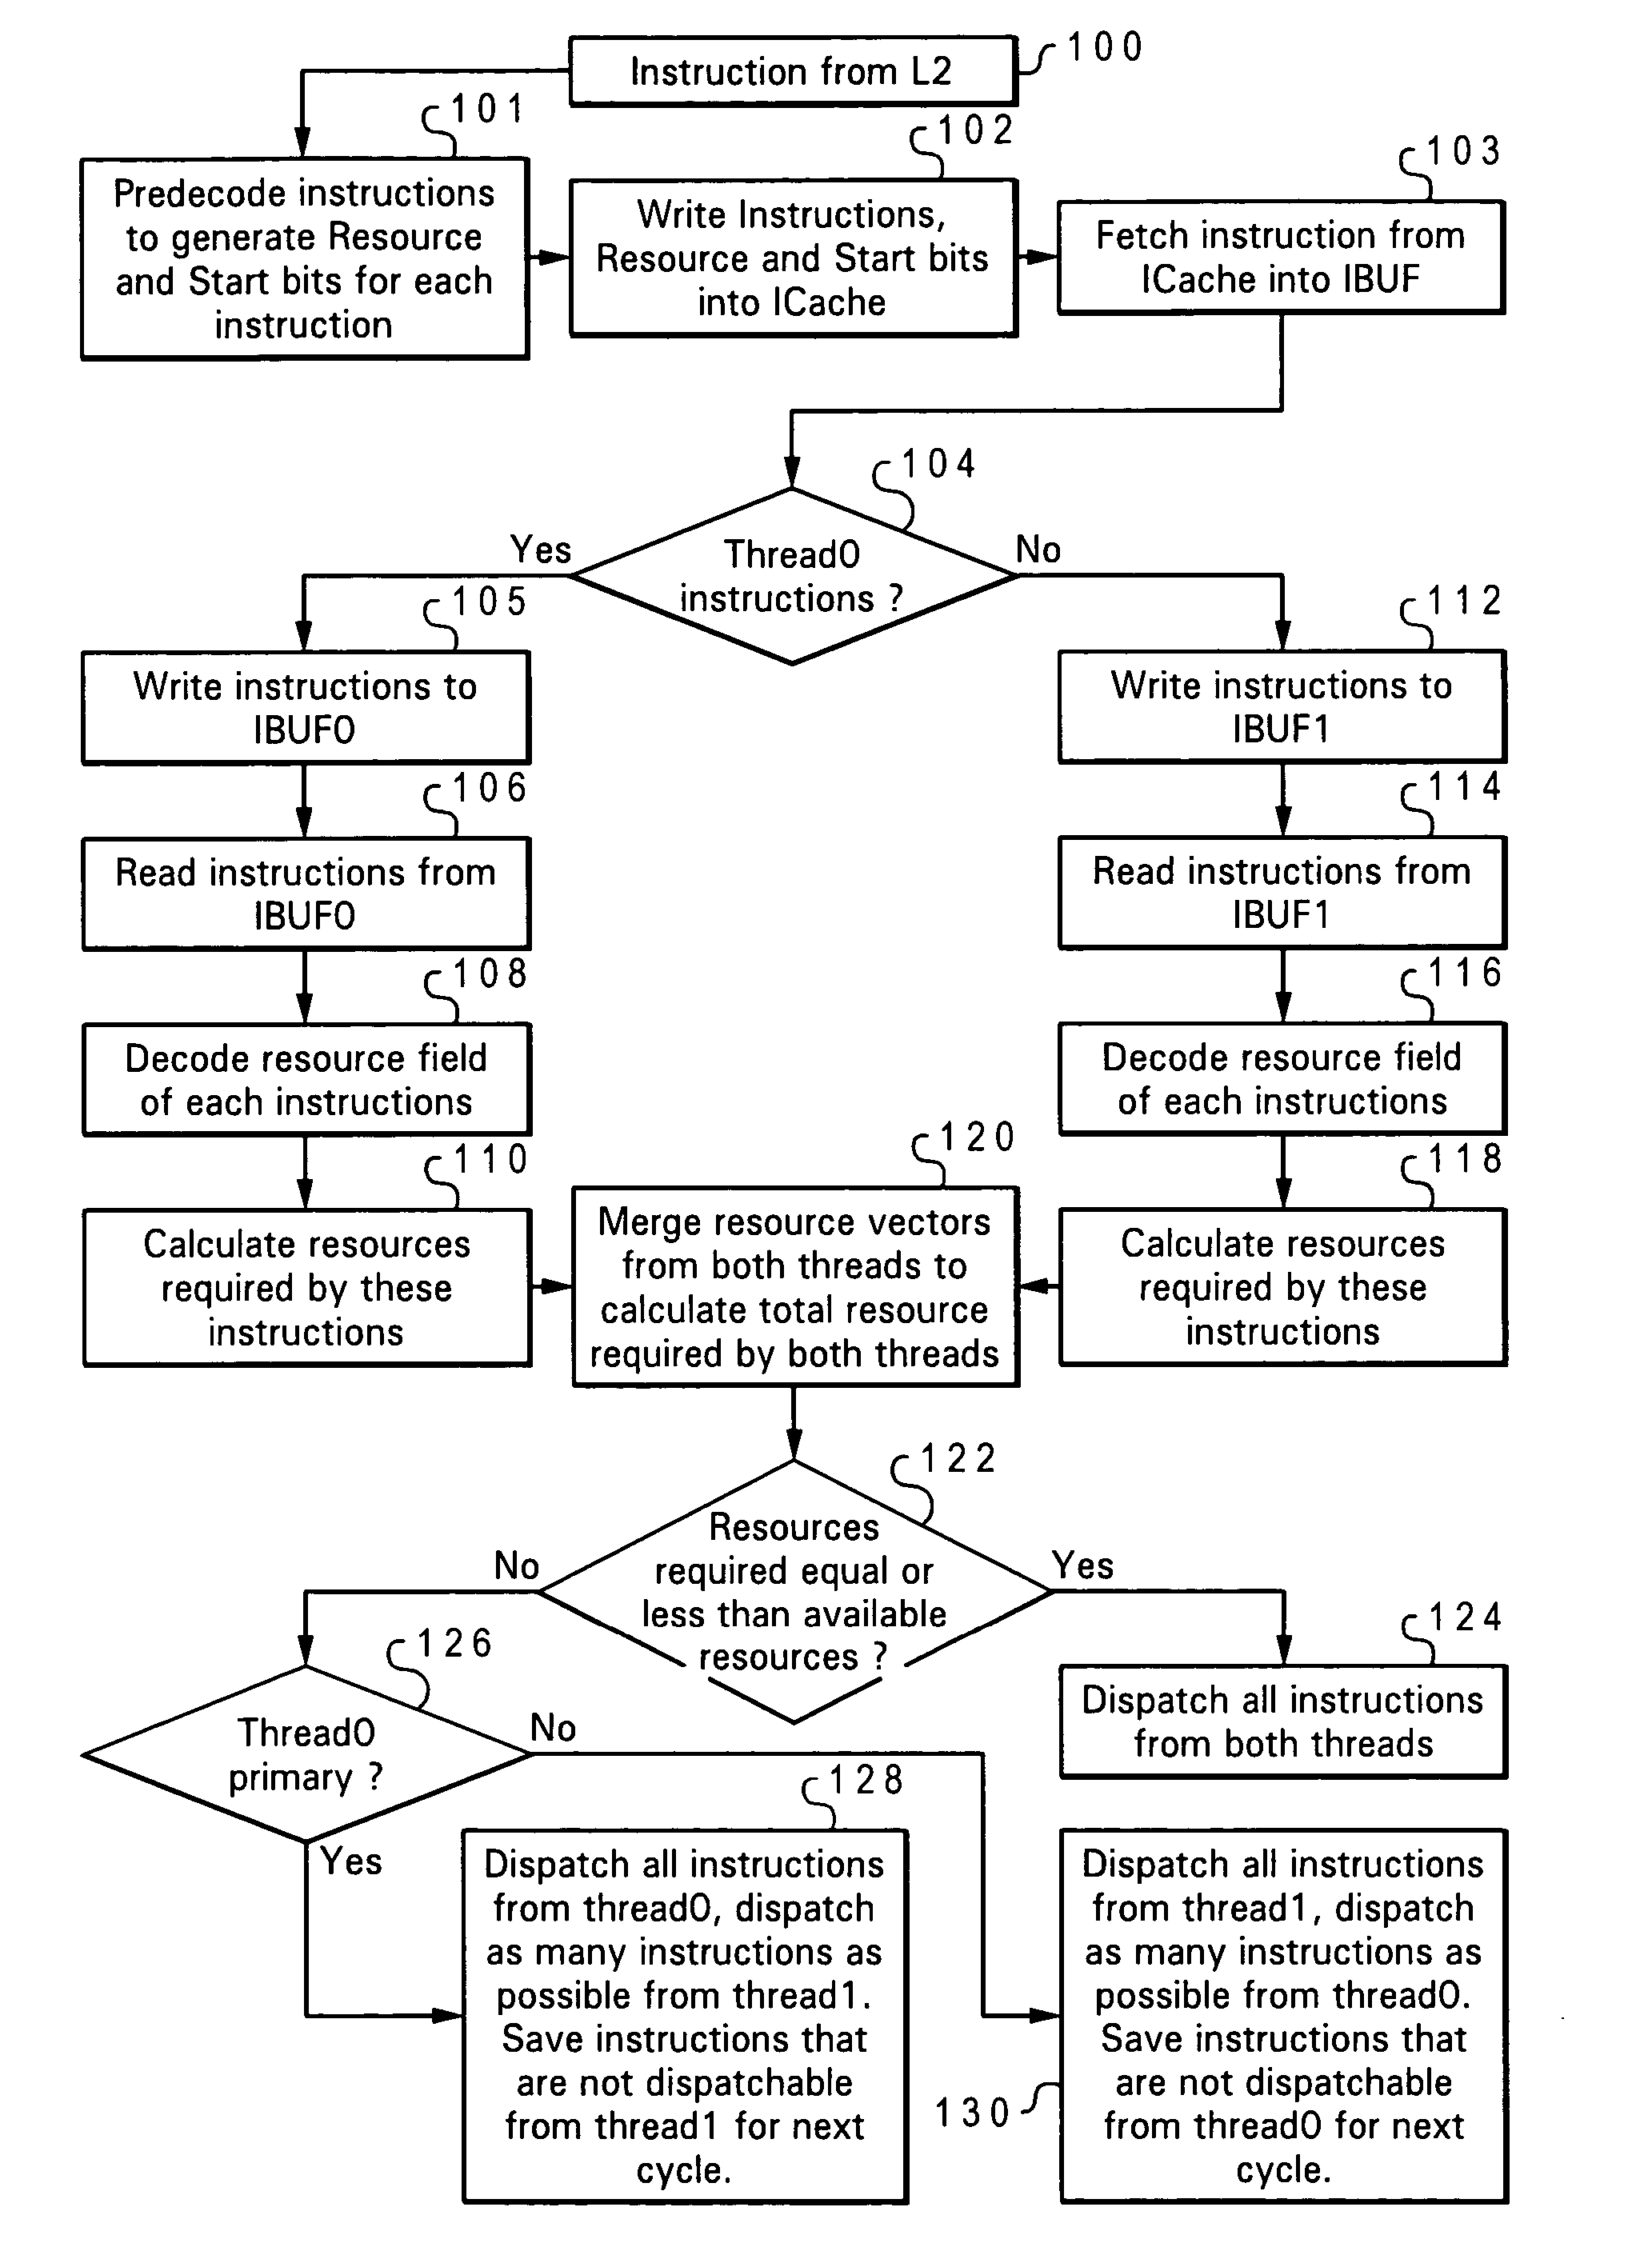 Instruction group formation and mechanism for SMT dispatch